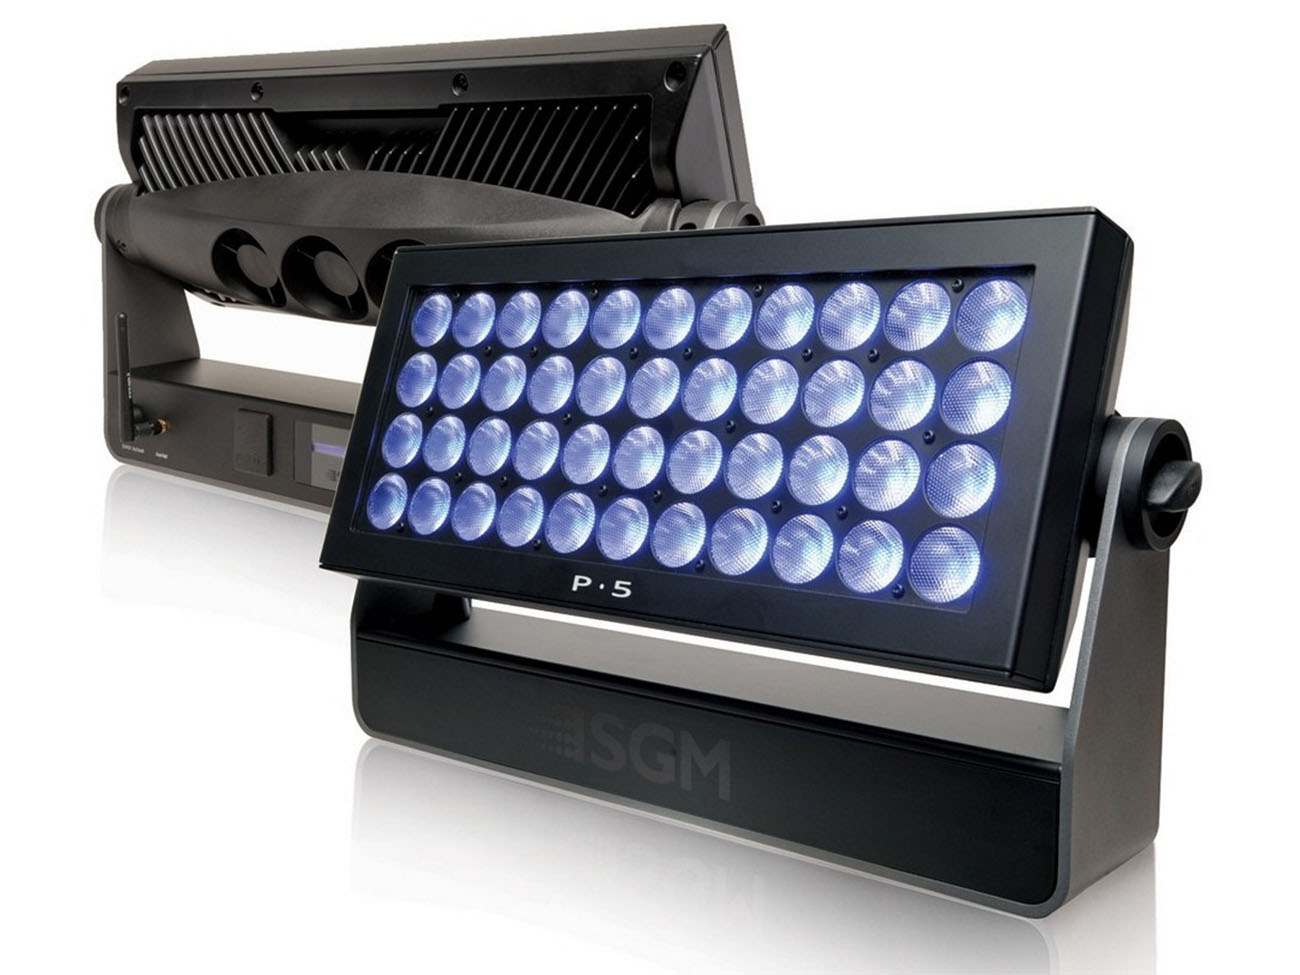 Used, Second SGM Light P-5 Outdoor IP65 Wash LED Color Changer Used Audio, and Video Equipment - Usedful.eu